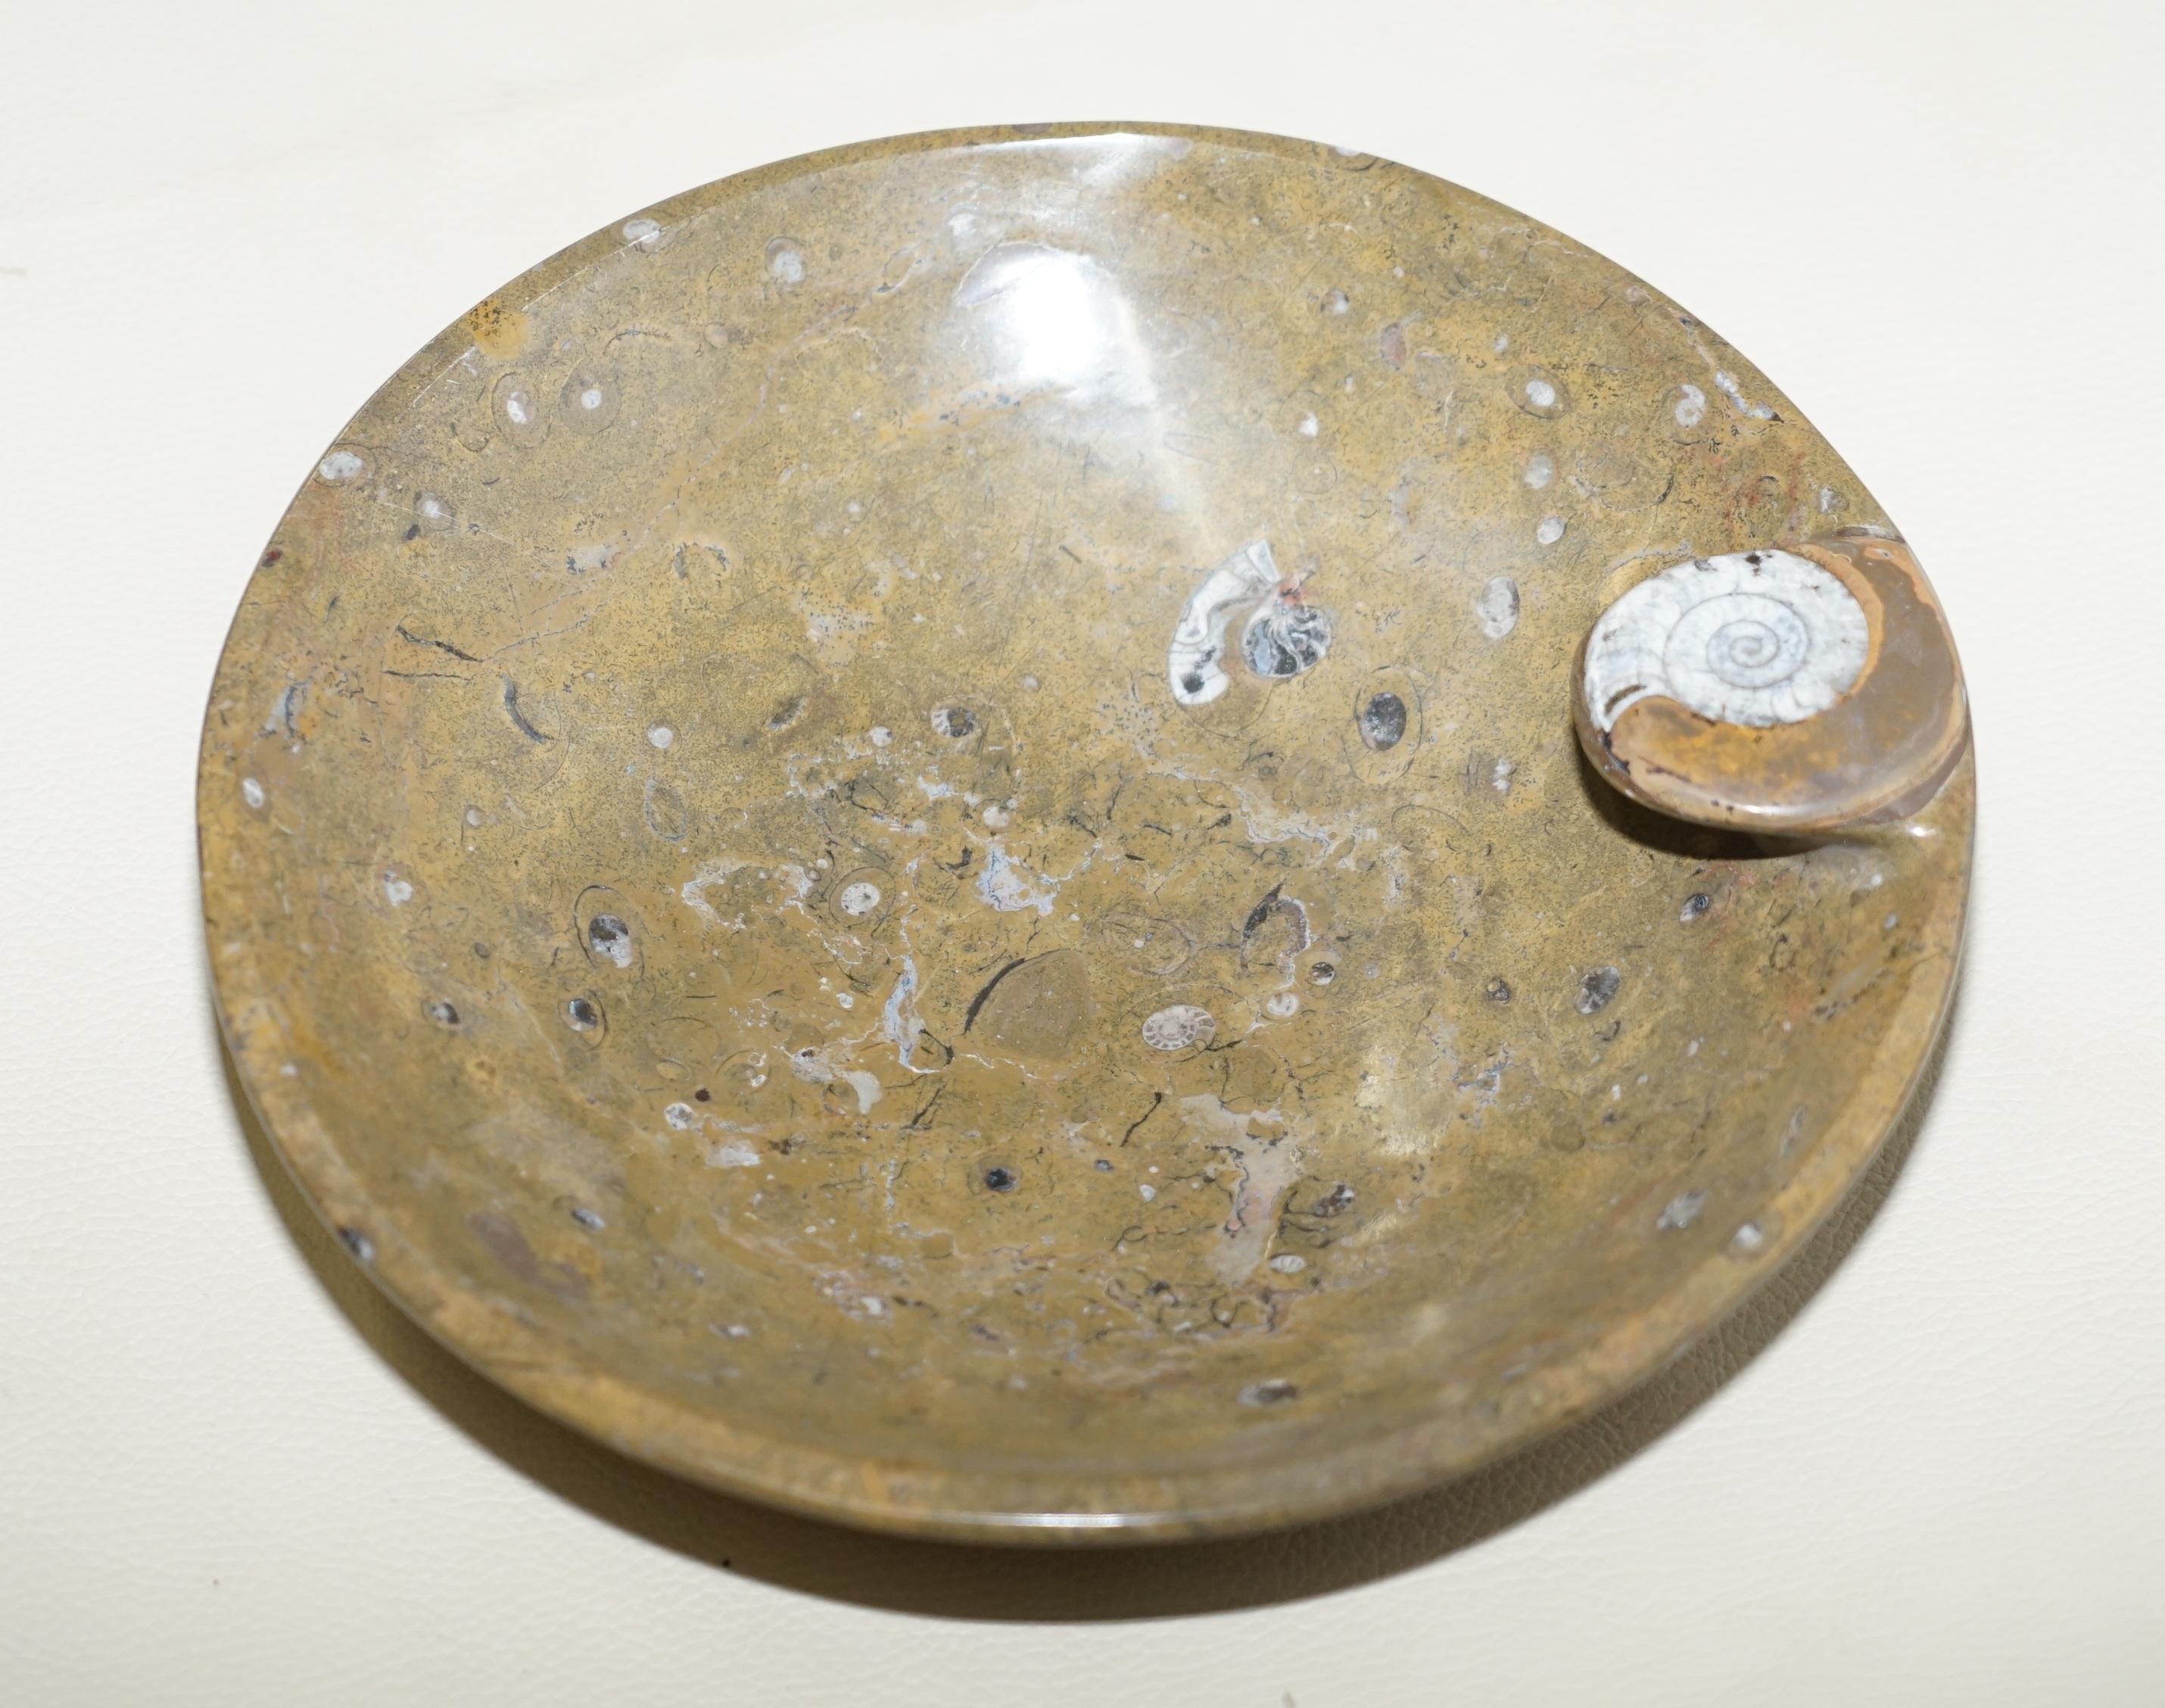 We are delighted to offer for sale this very decorative original circa 180+ Million year old Atlas Mountains Morocco Fossil bowl polished to a marble finish

They are truly exquisite, they each have one large fossil to the top and various fossils